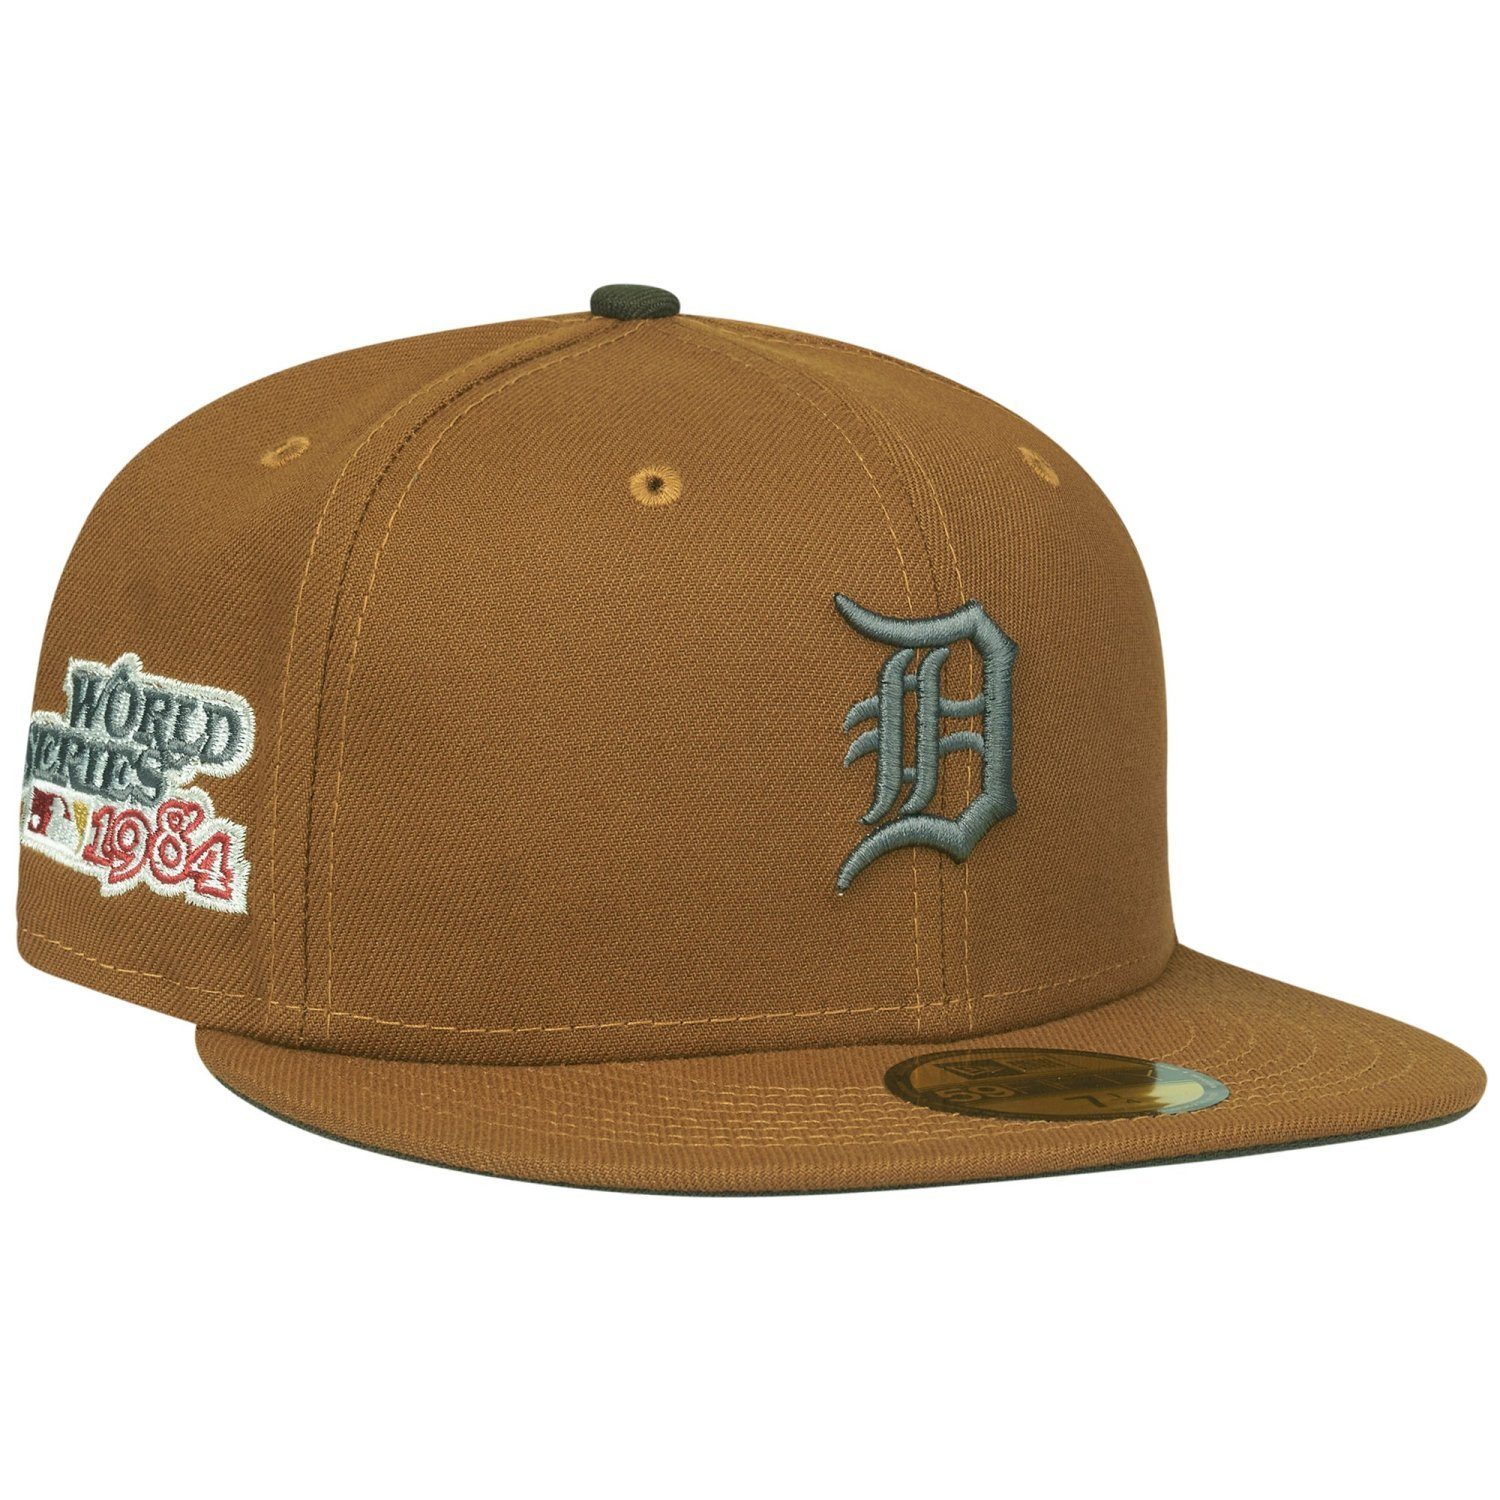 New Era Fitted Cap 59Fifty WORLD SERIES 1984 Detroit Tigers